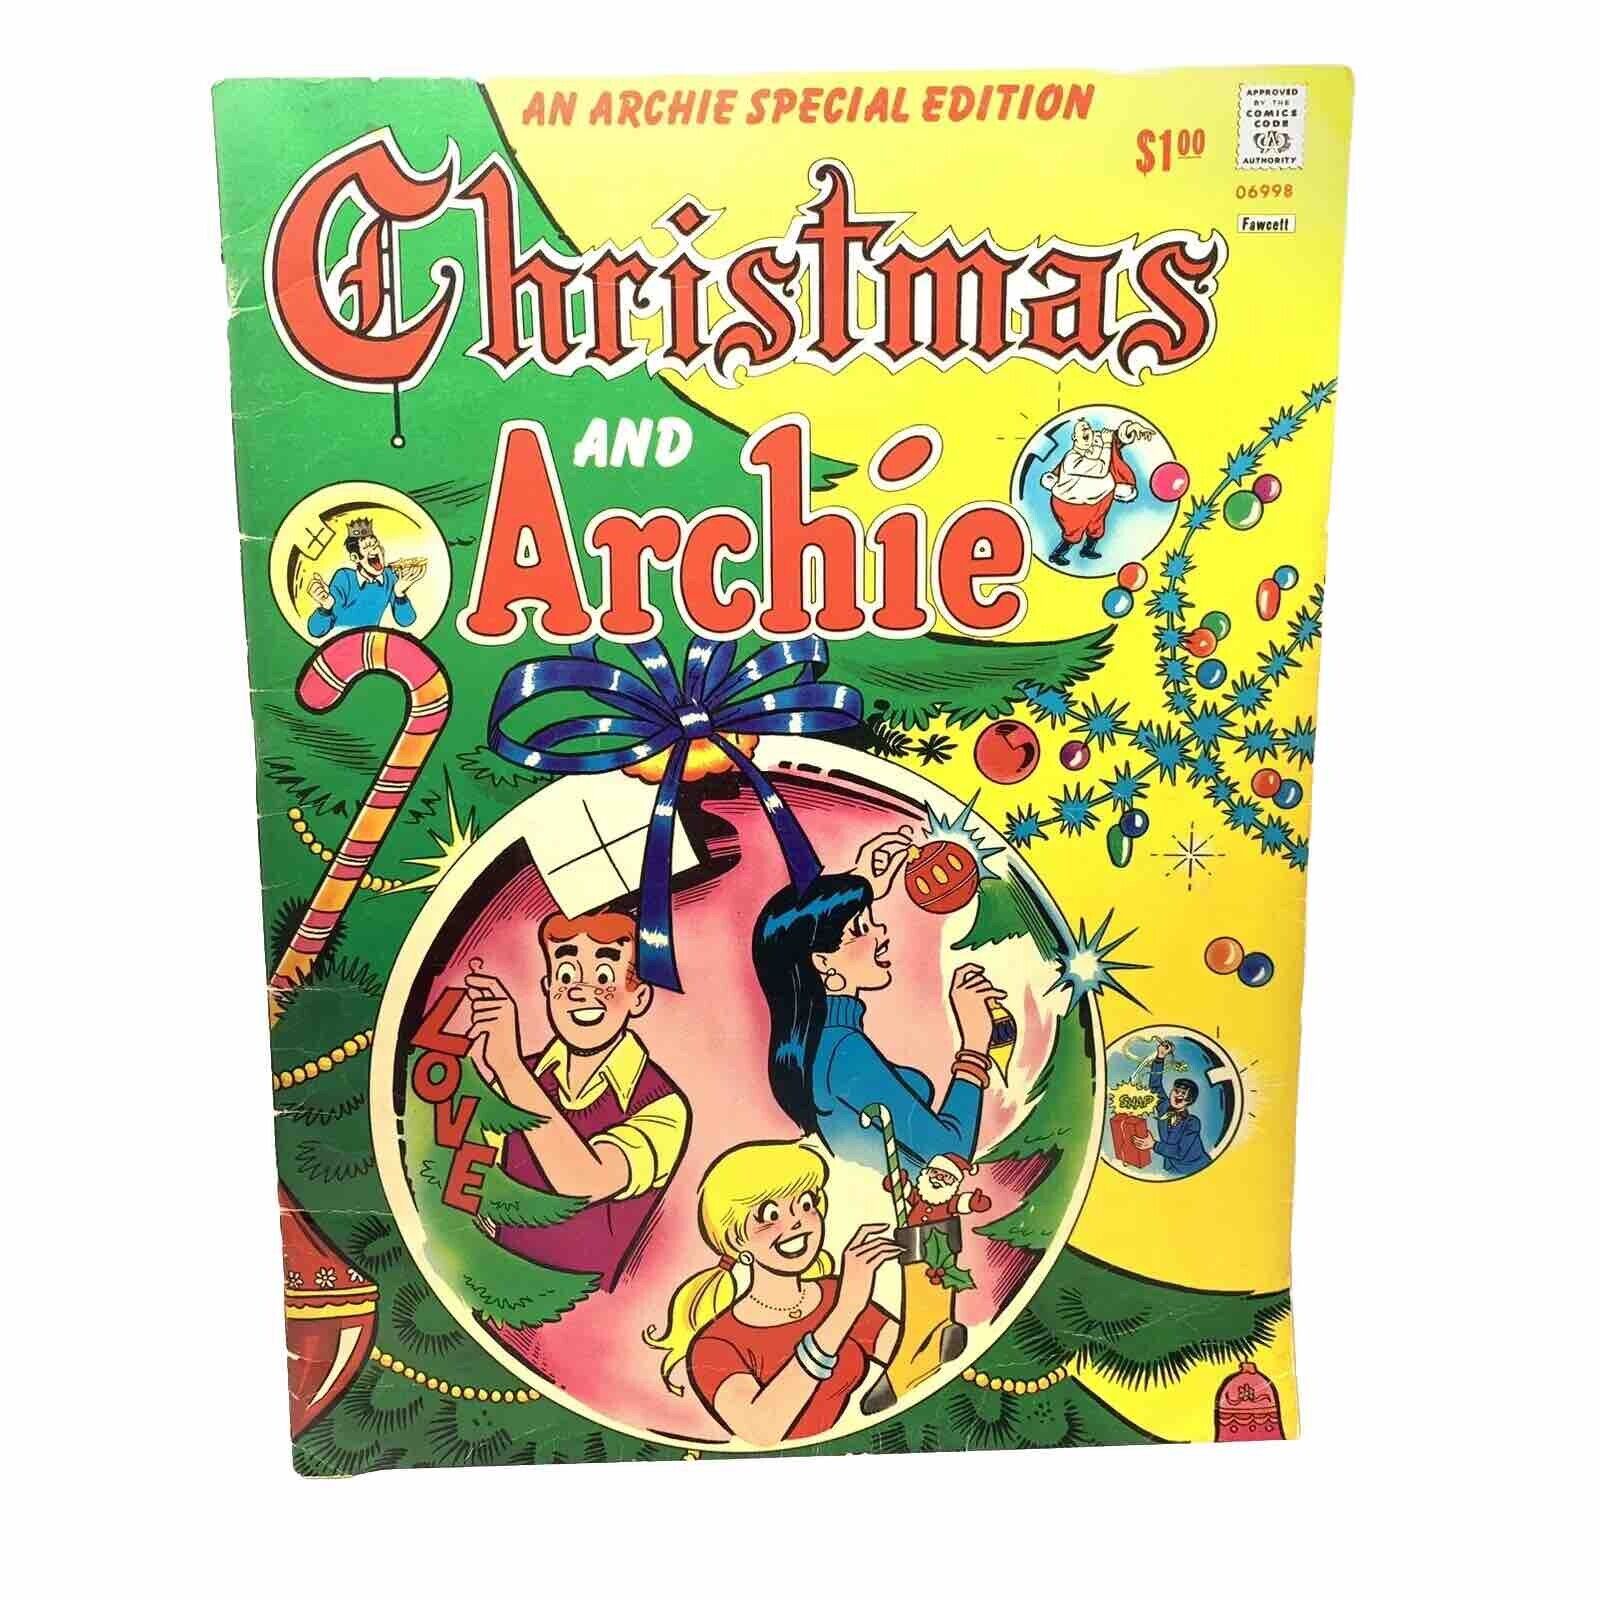 An Archie Special Edition, Christmas And Archie #1 Archie Treasury Edition  1975